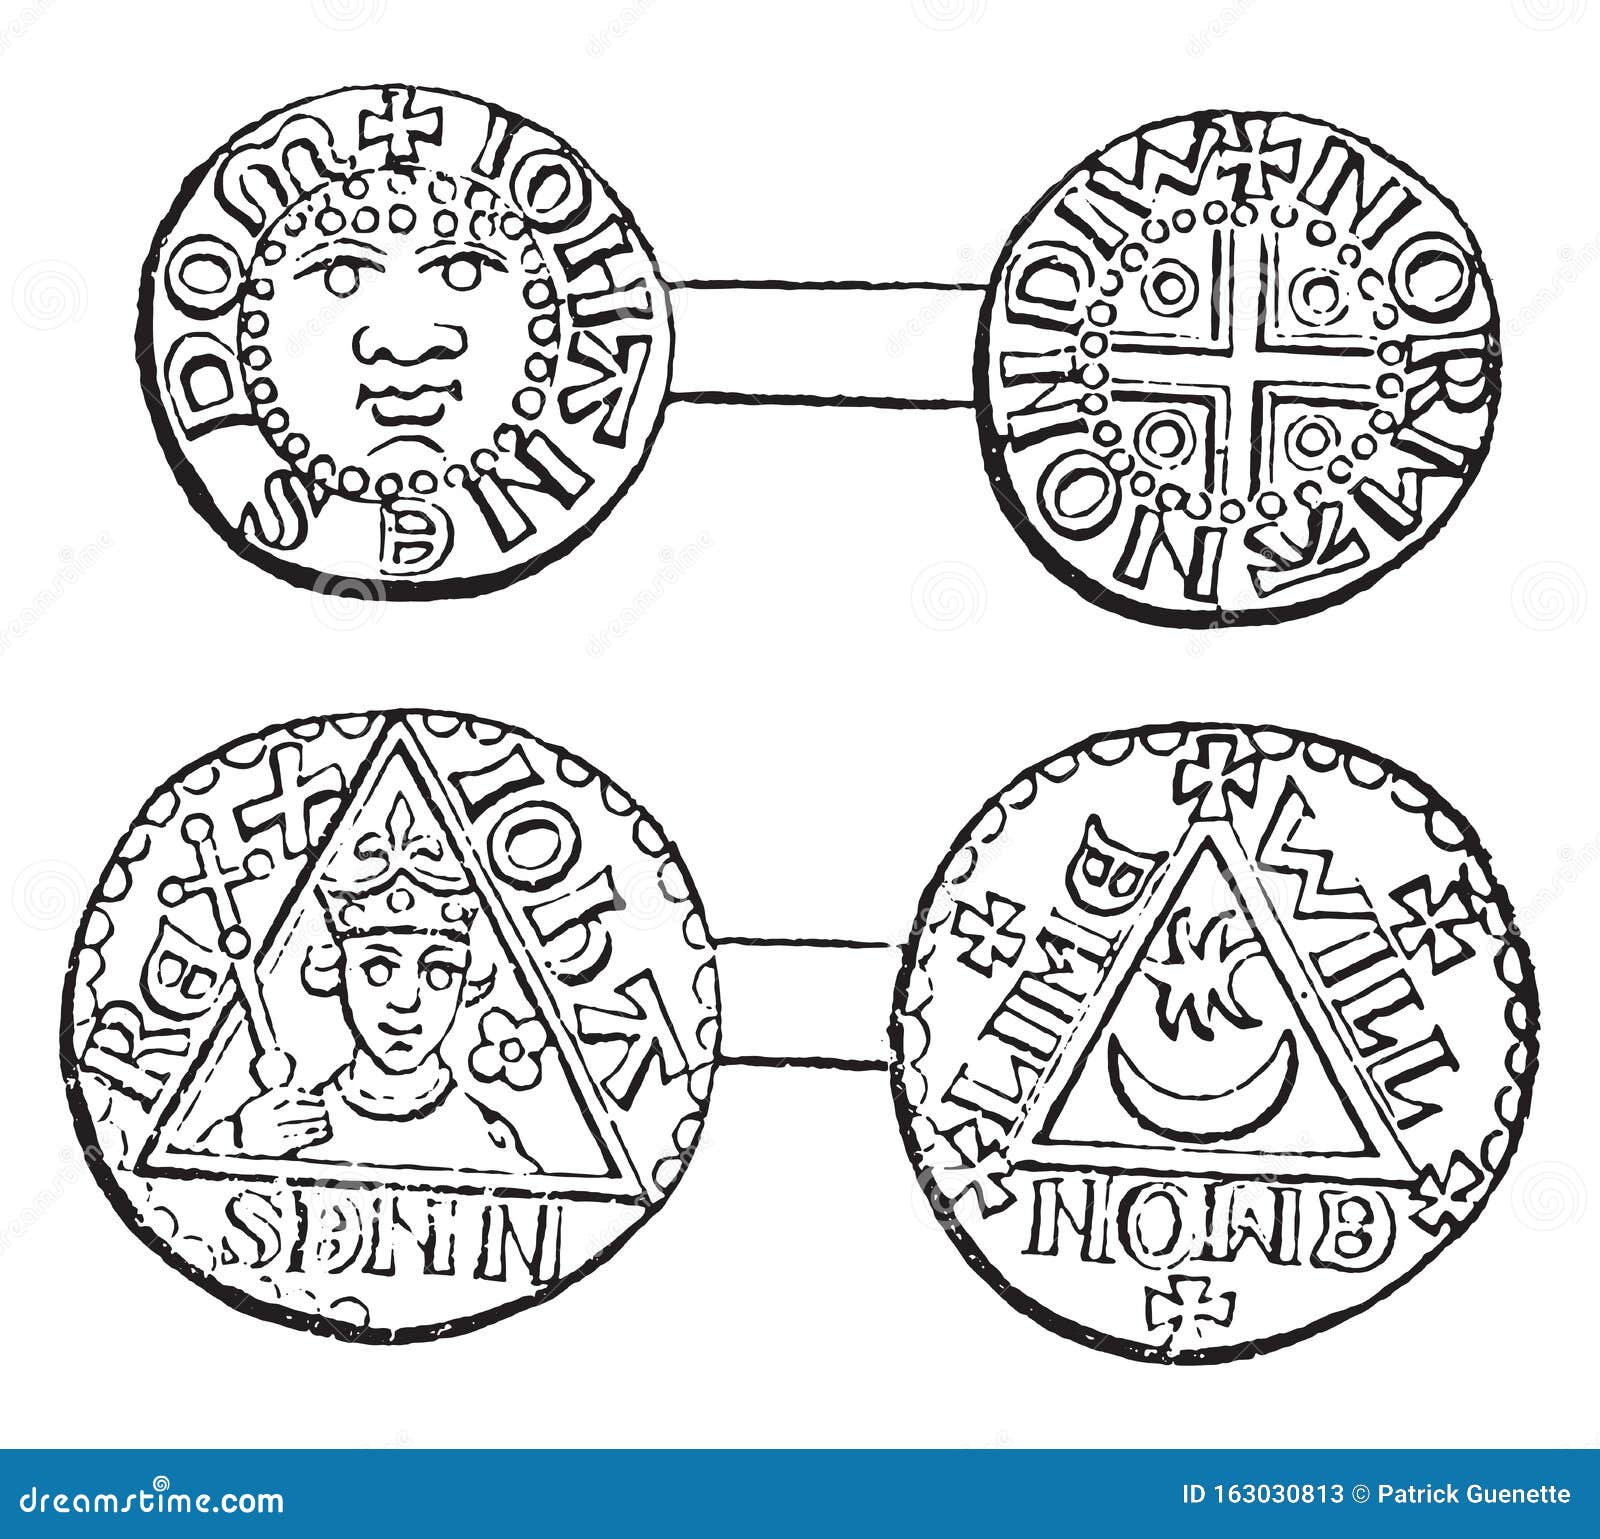 coins minted during the reign of king john, vintage engraving